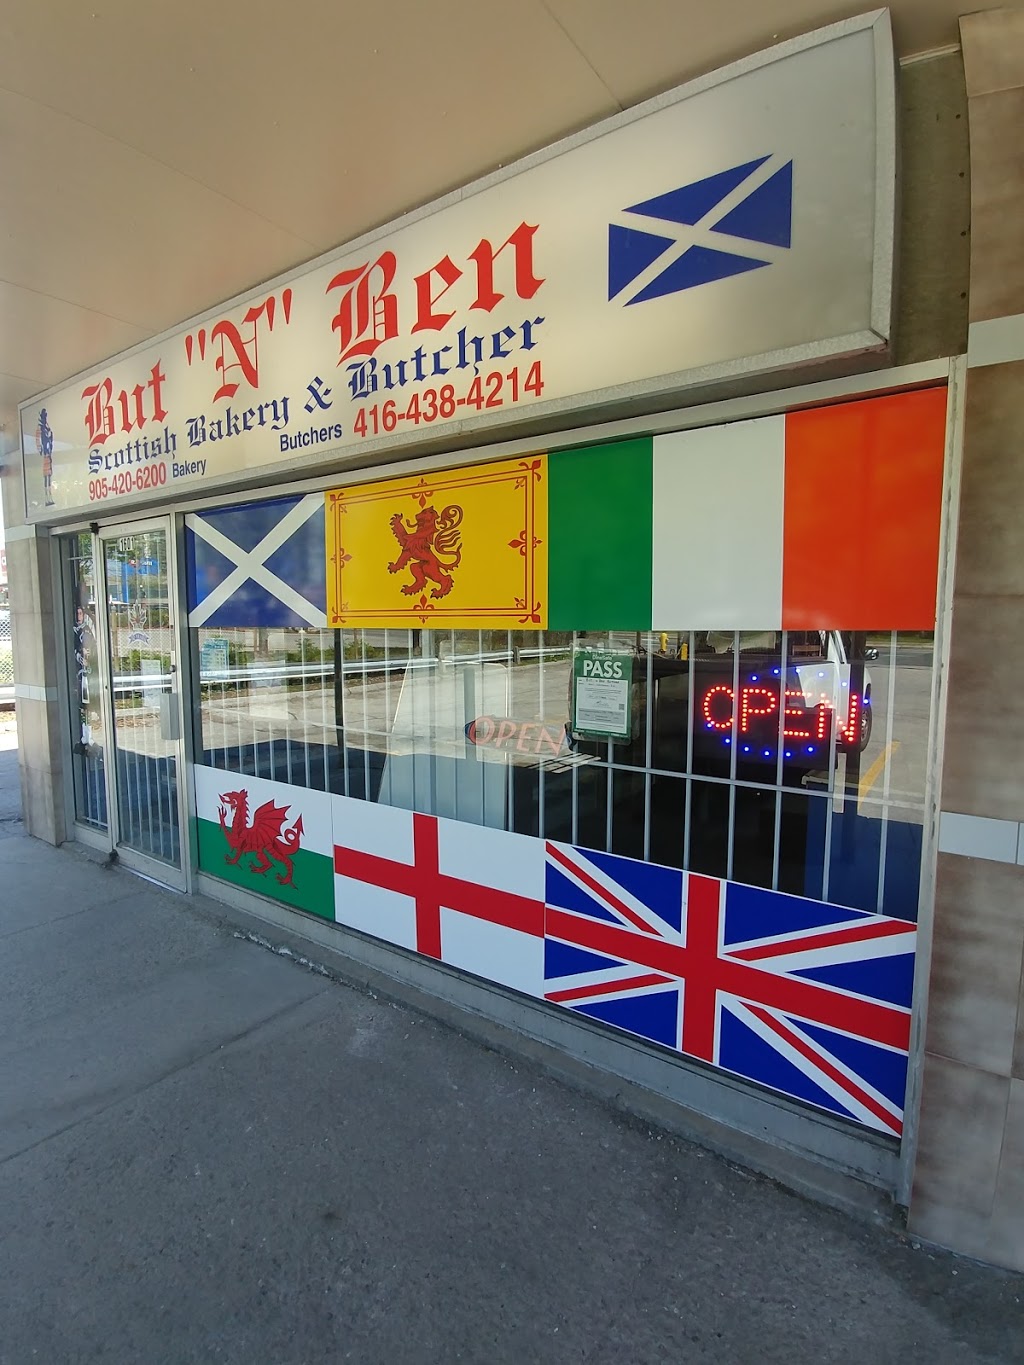 But n Ben Butchers | bakery | 1601 Ellesmere Rd, Scarborough, ON M1P 2Y3, Canada | 4164384214 OR +1 416-438-4214